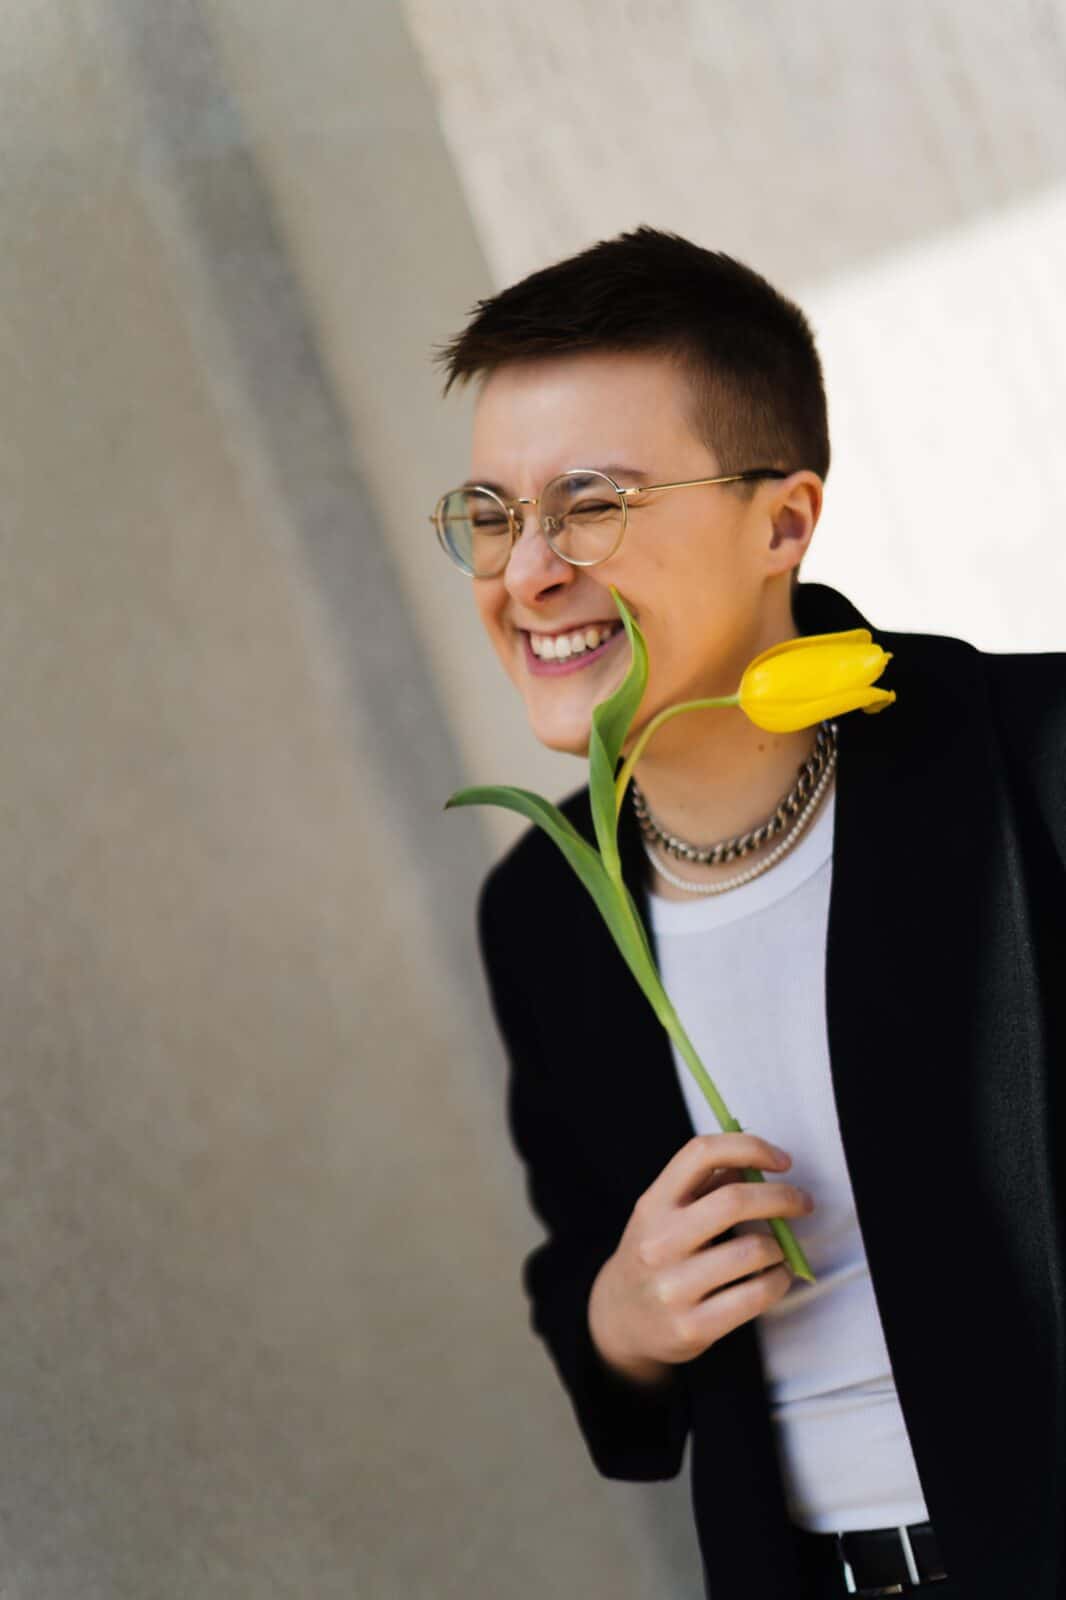 Fiction and creative nonfiction writer, essayist, creator of community and teacher Stevie Billow holds a tulip, laughing, in a t-shirt and blazer. Press photo courtesy of the artist